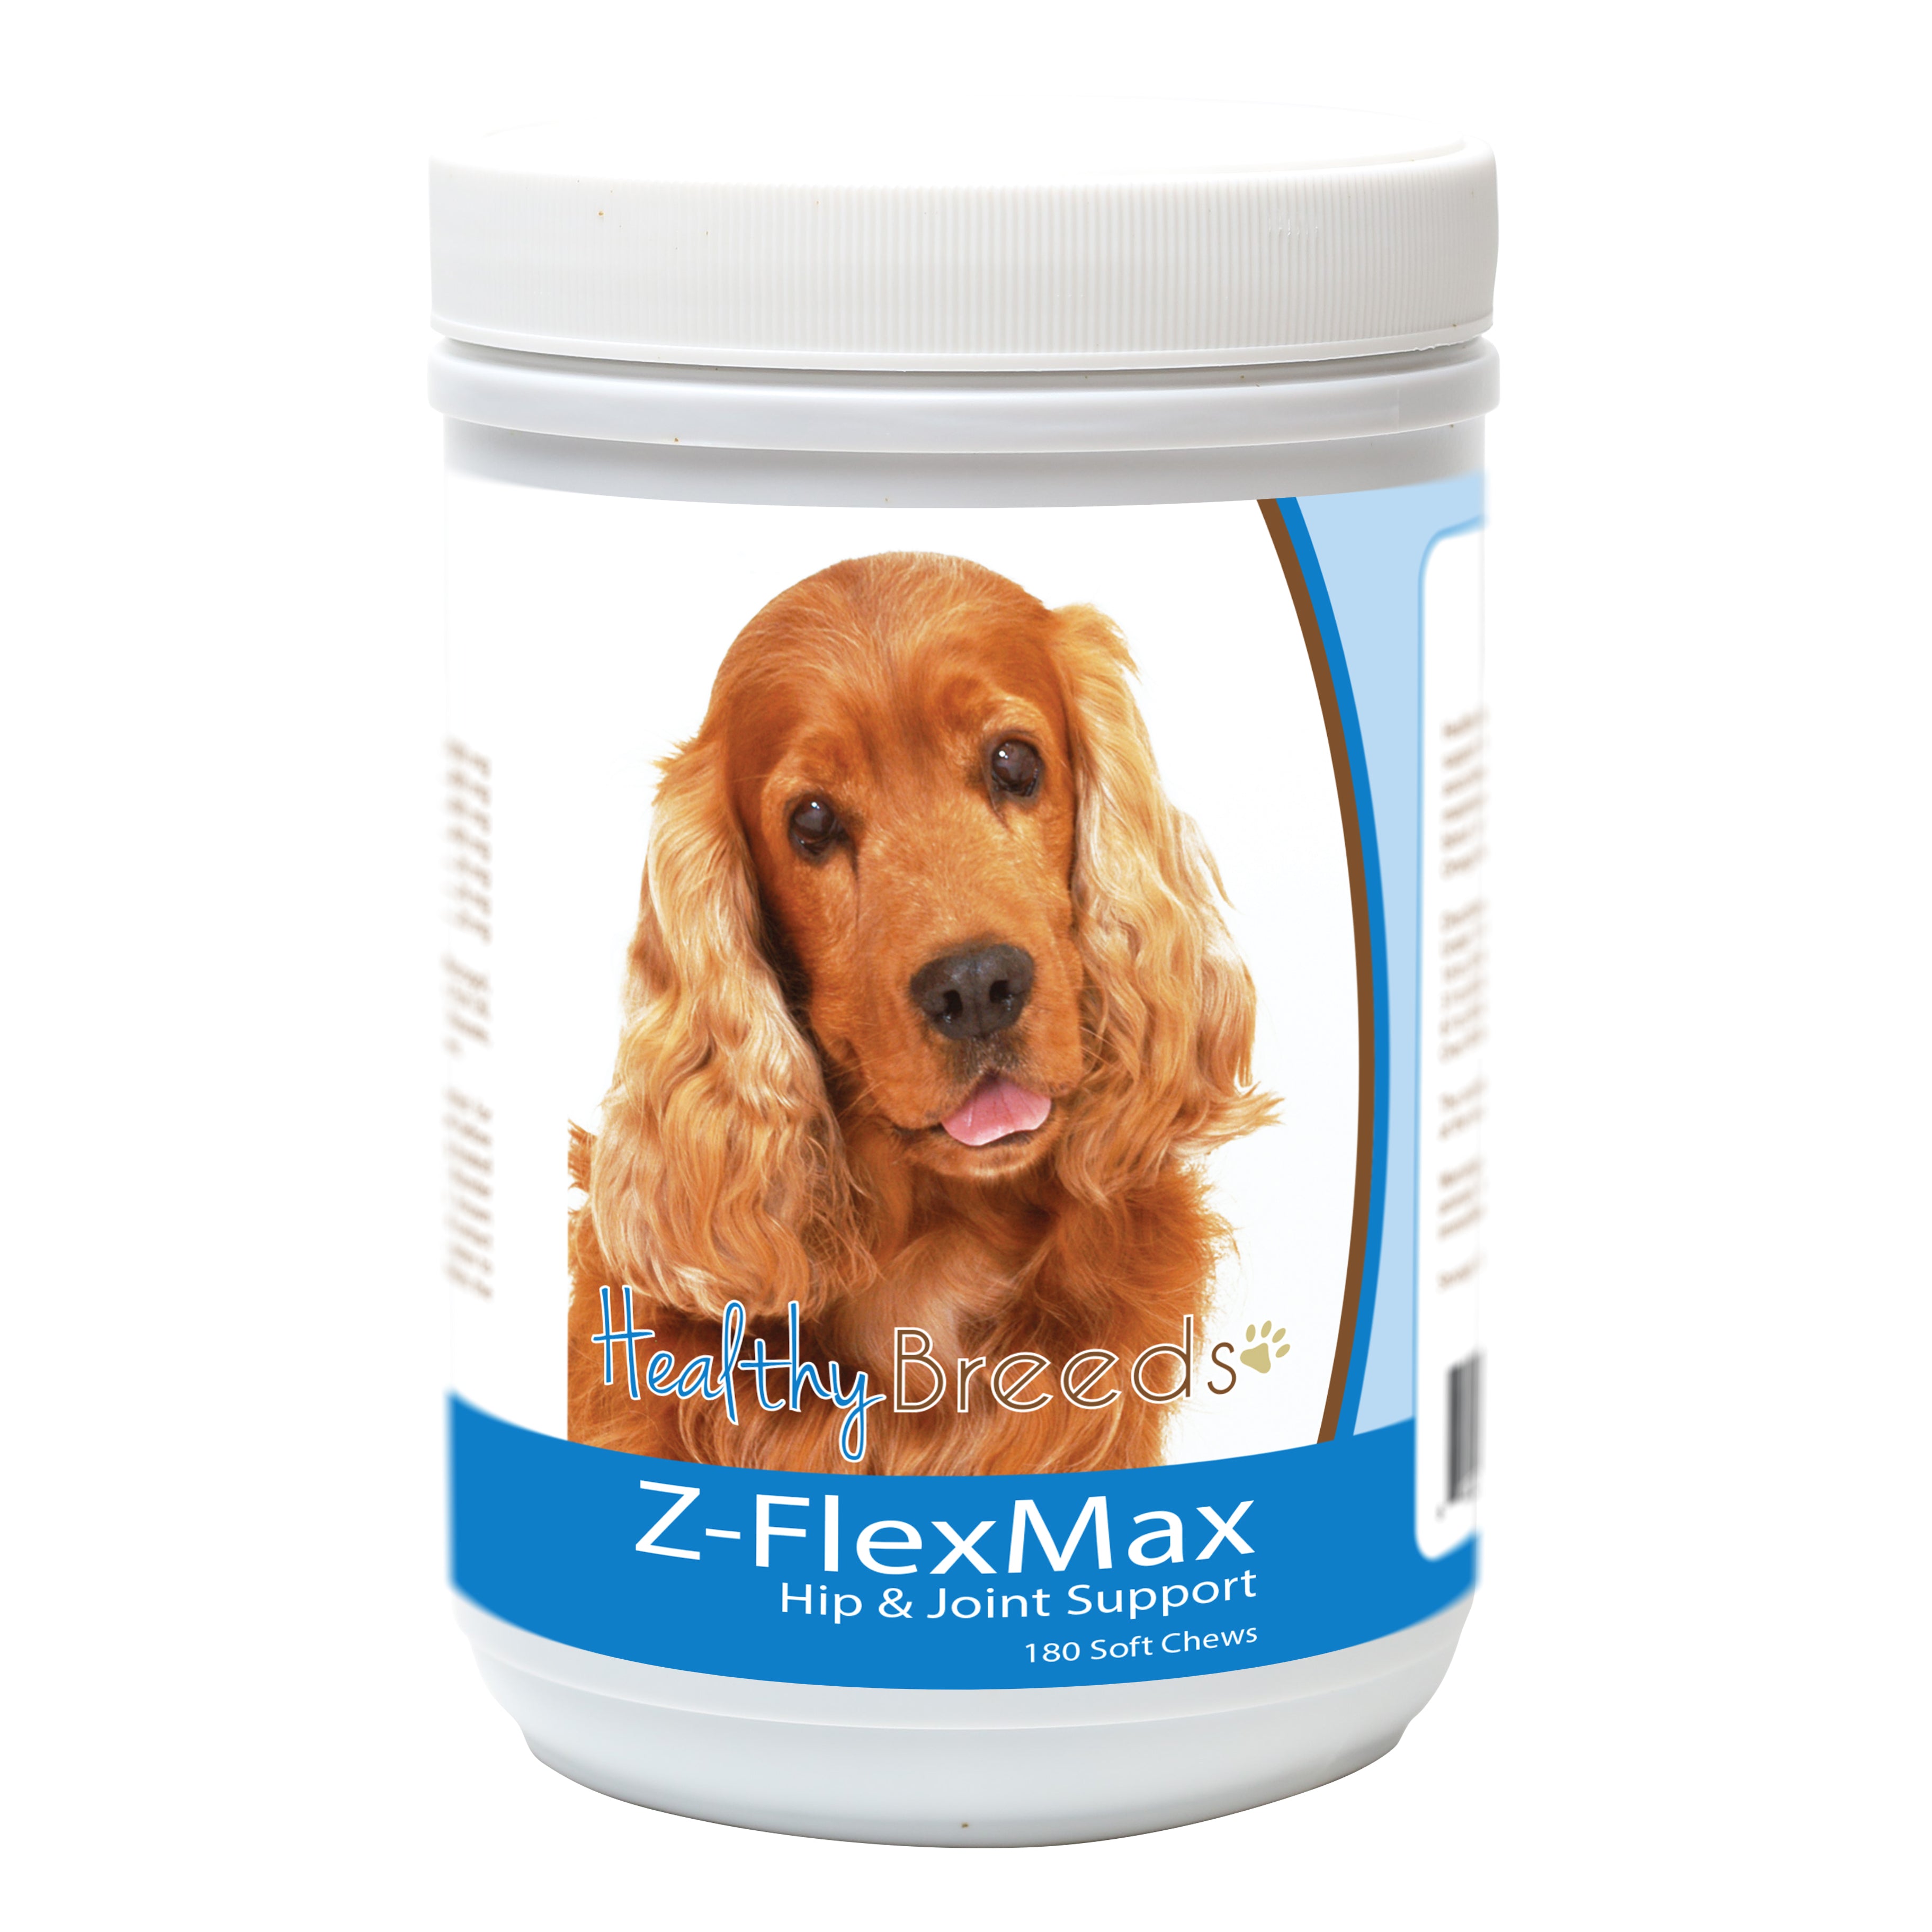 Cocker Spaniel Z-Flex Max Dog Hip and Joint Support 180 Count